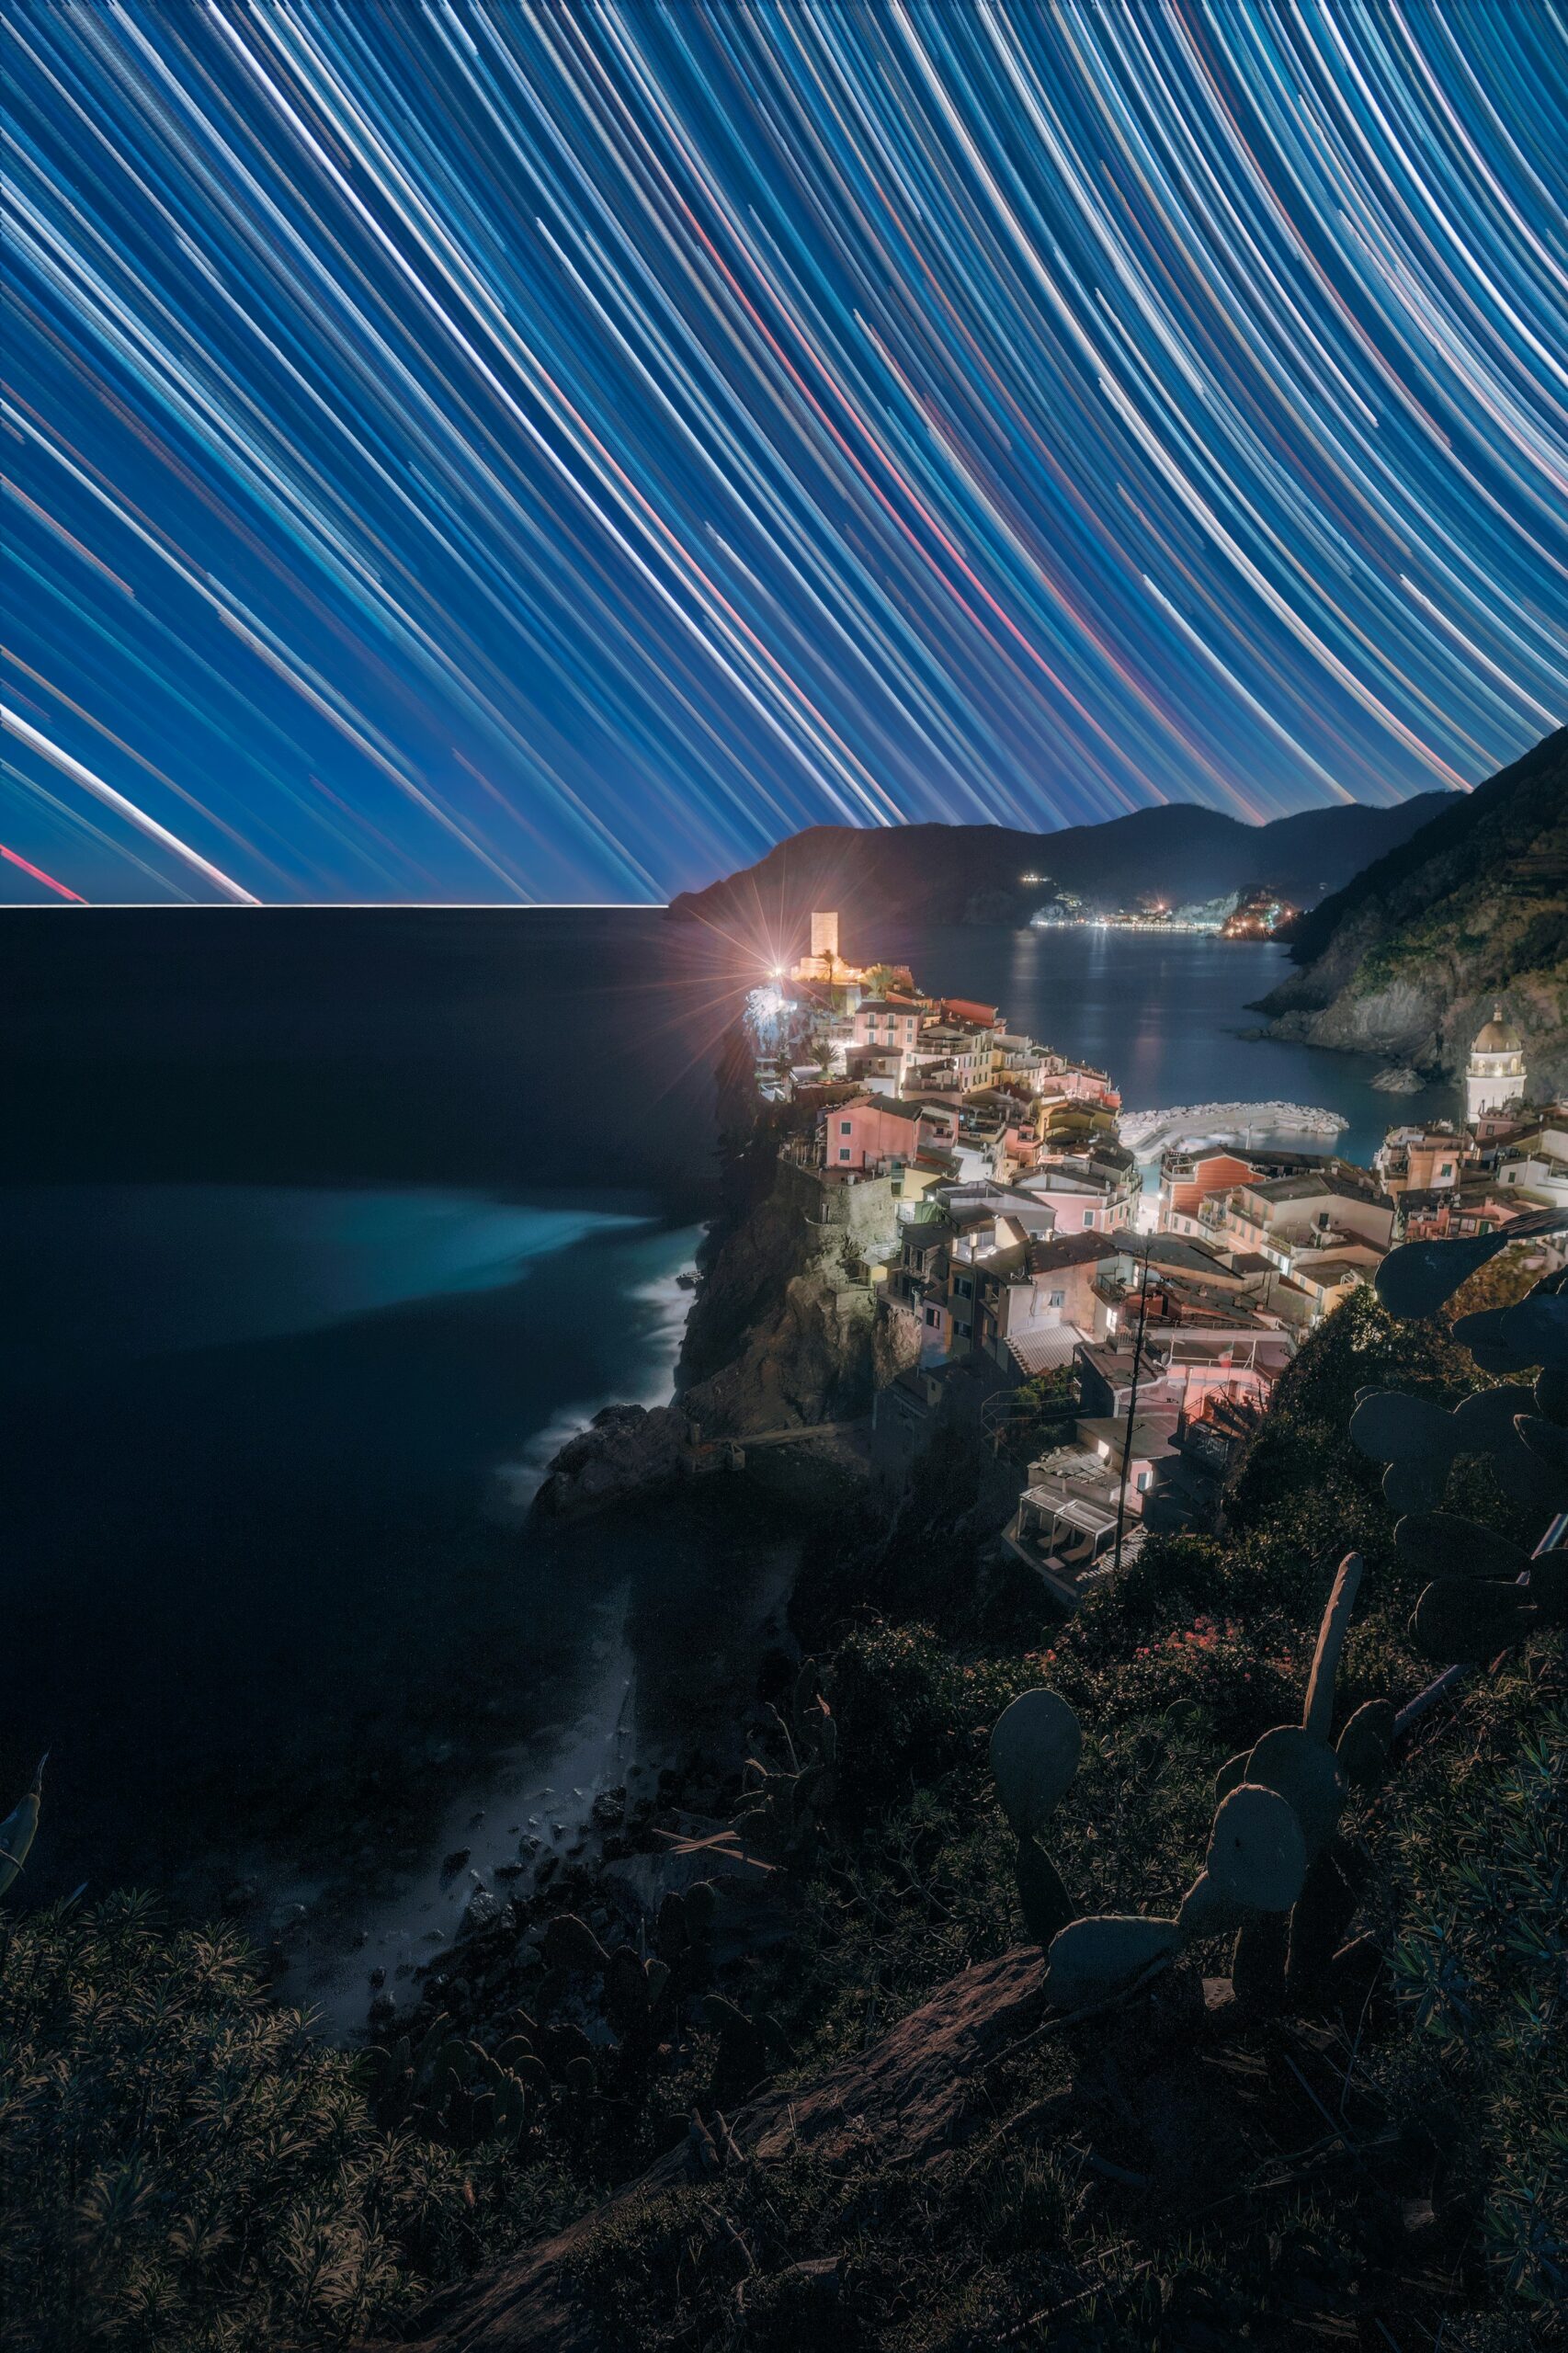 a long exposure of the night sky over a town